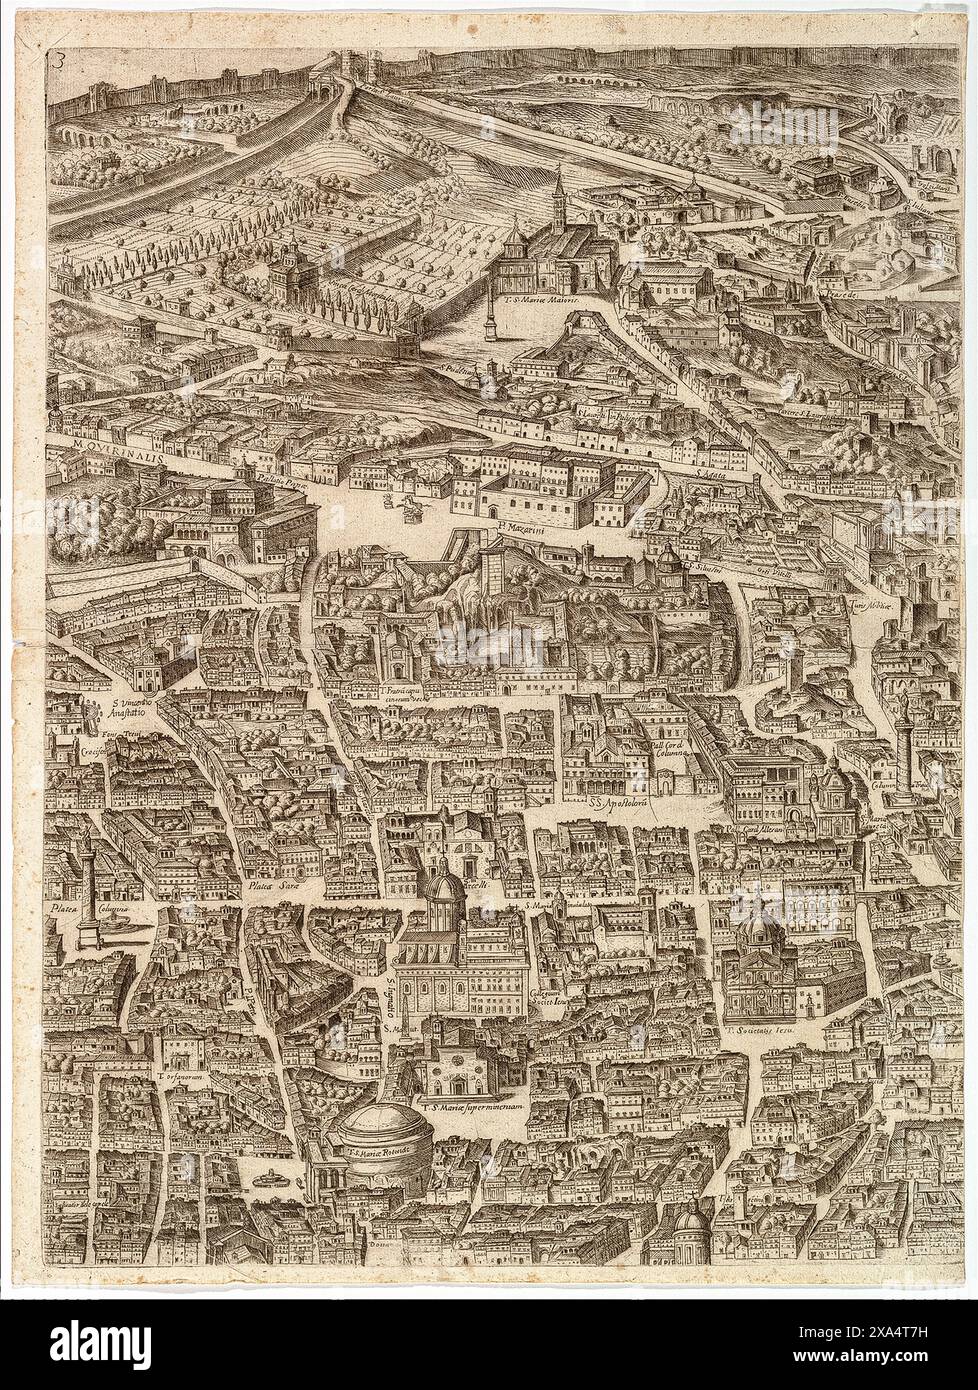 Plan of the City of Rome. the Santa Maria Maggiore, the Pantheon and Trajan's Column by Antonio Tempesta in 1645 Stock Photo